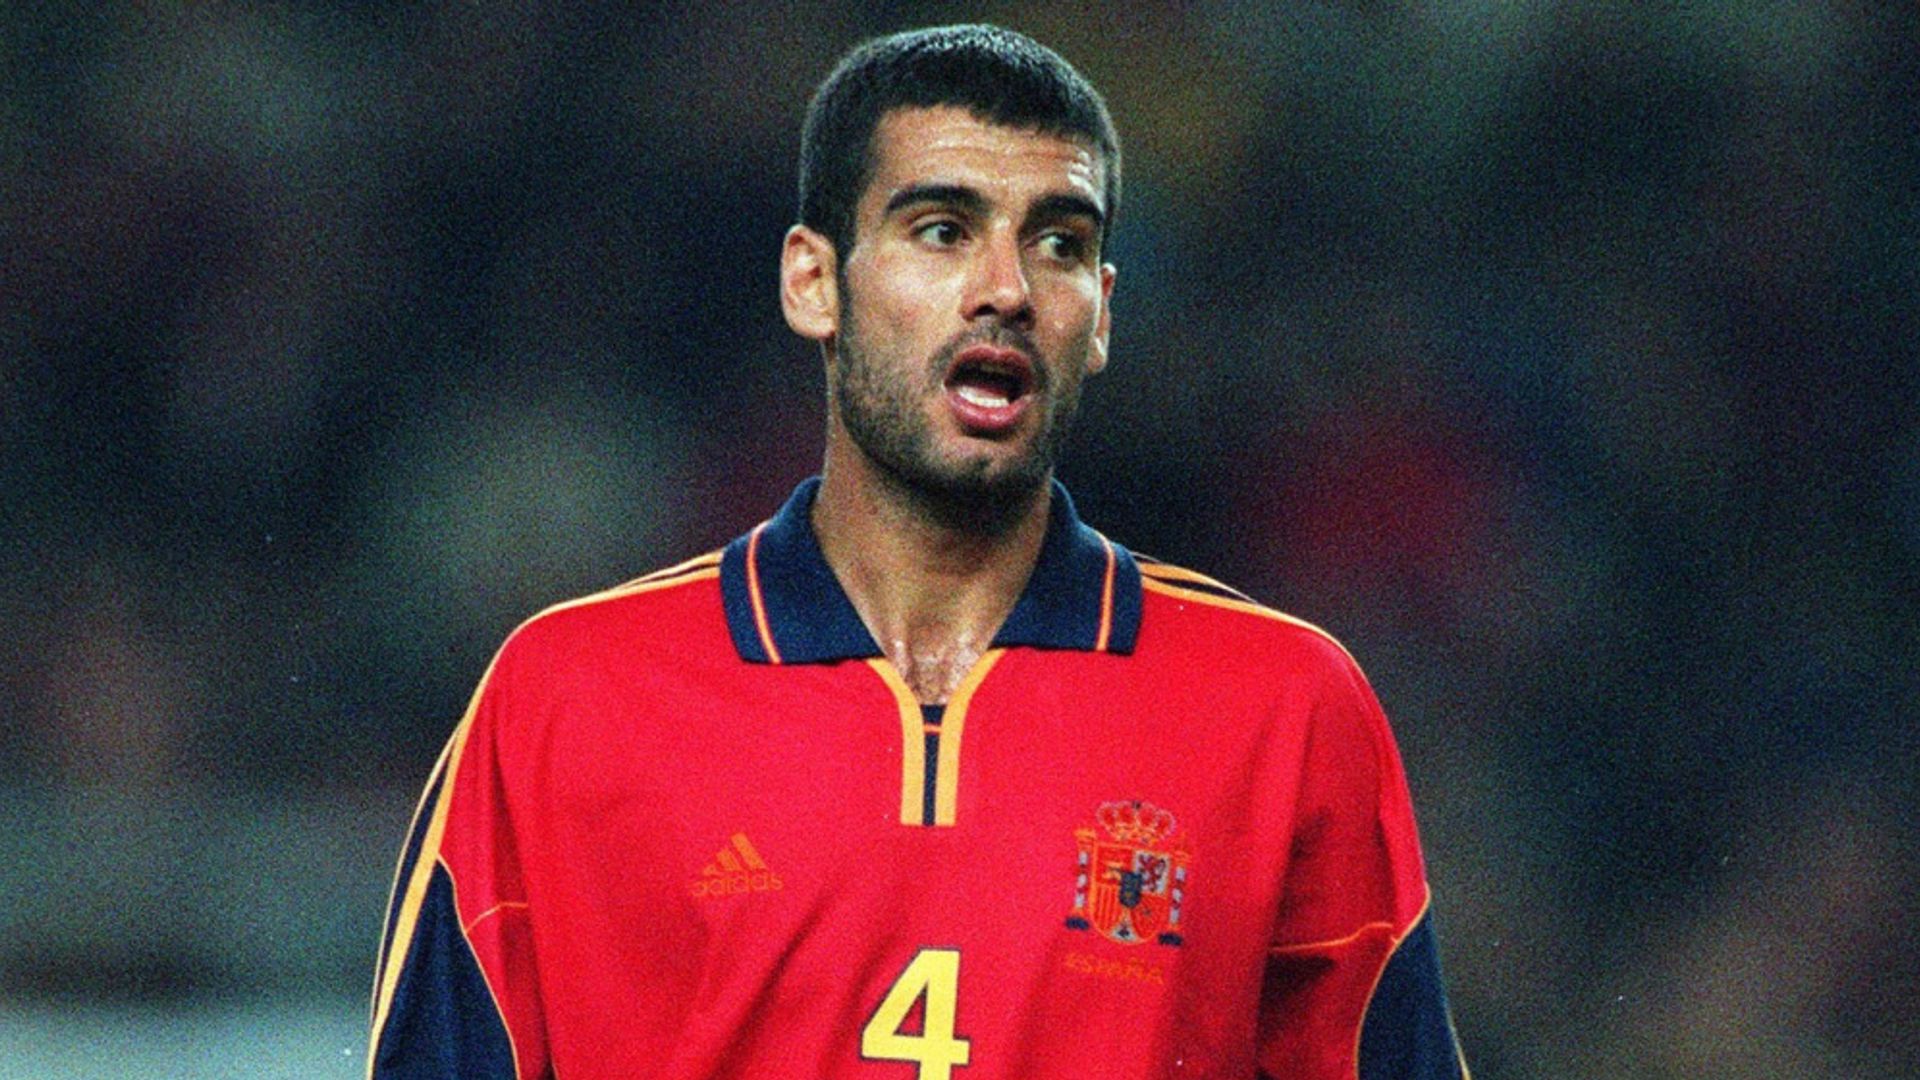 Guardiola on the pitch (2000)